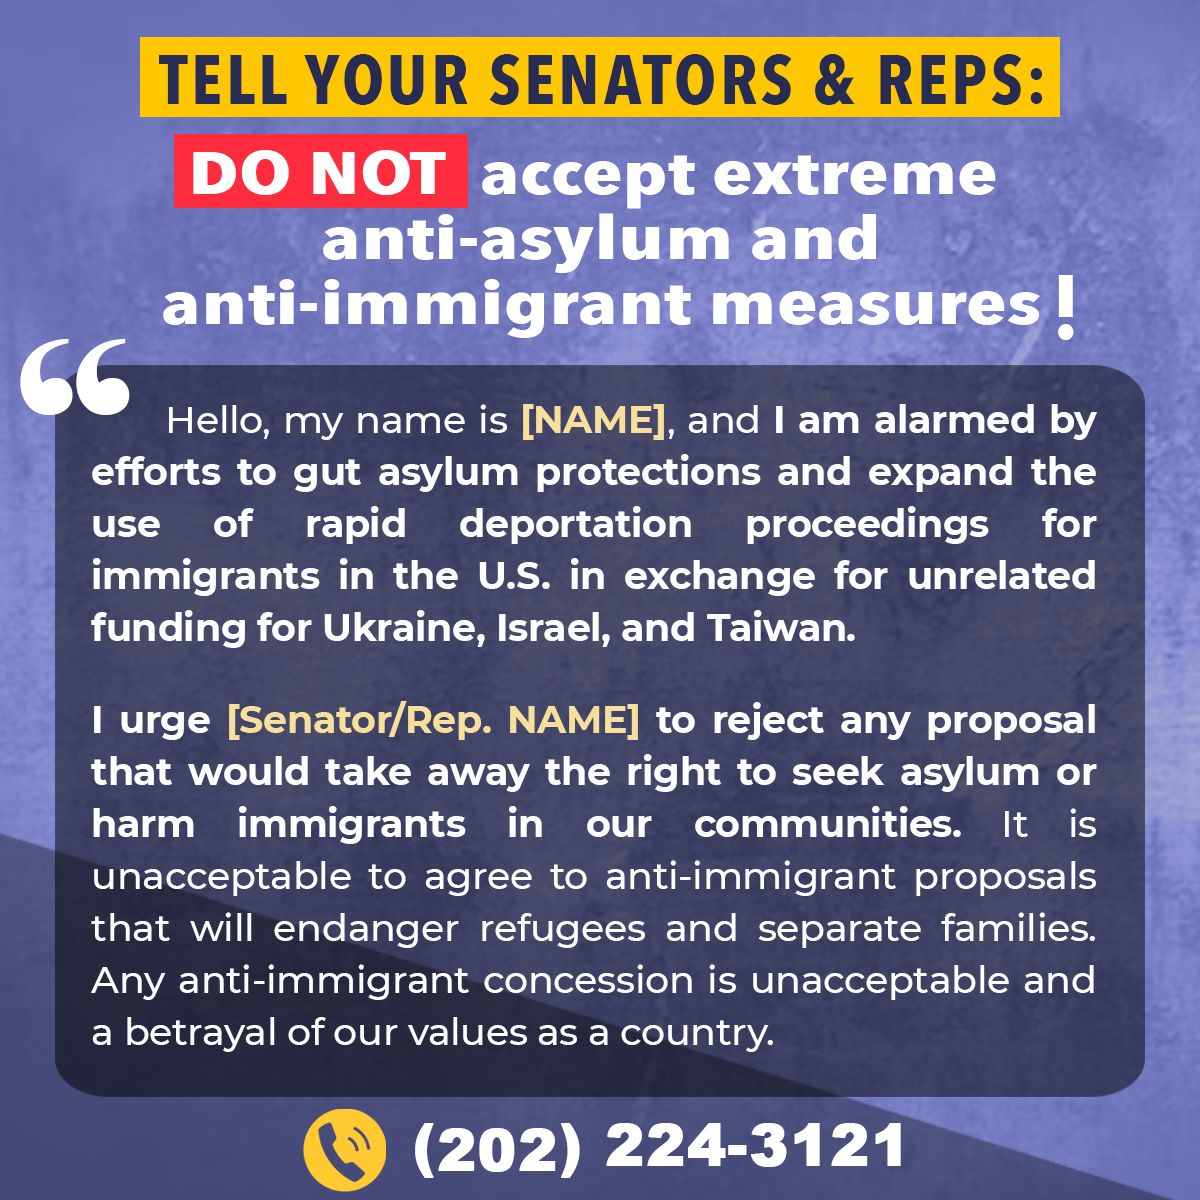 TAKE ACTION - Call your Senators and Reps TODAY and urge them to reject efforts to trade asylum for foreign aid. Join us in protecting lives and defending the fundamental right to seek #asylum: wwdignity.org/NoTradeOffs #SaveAsylum